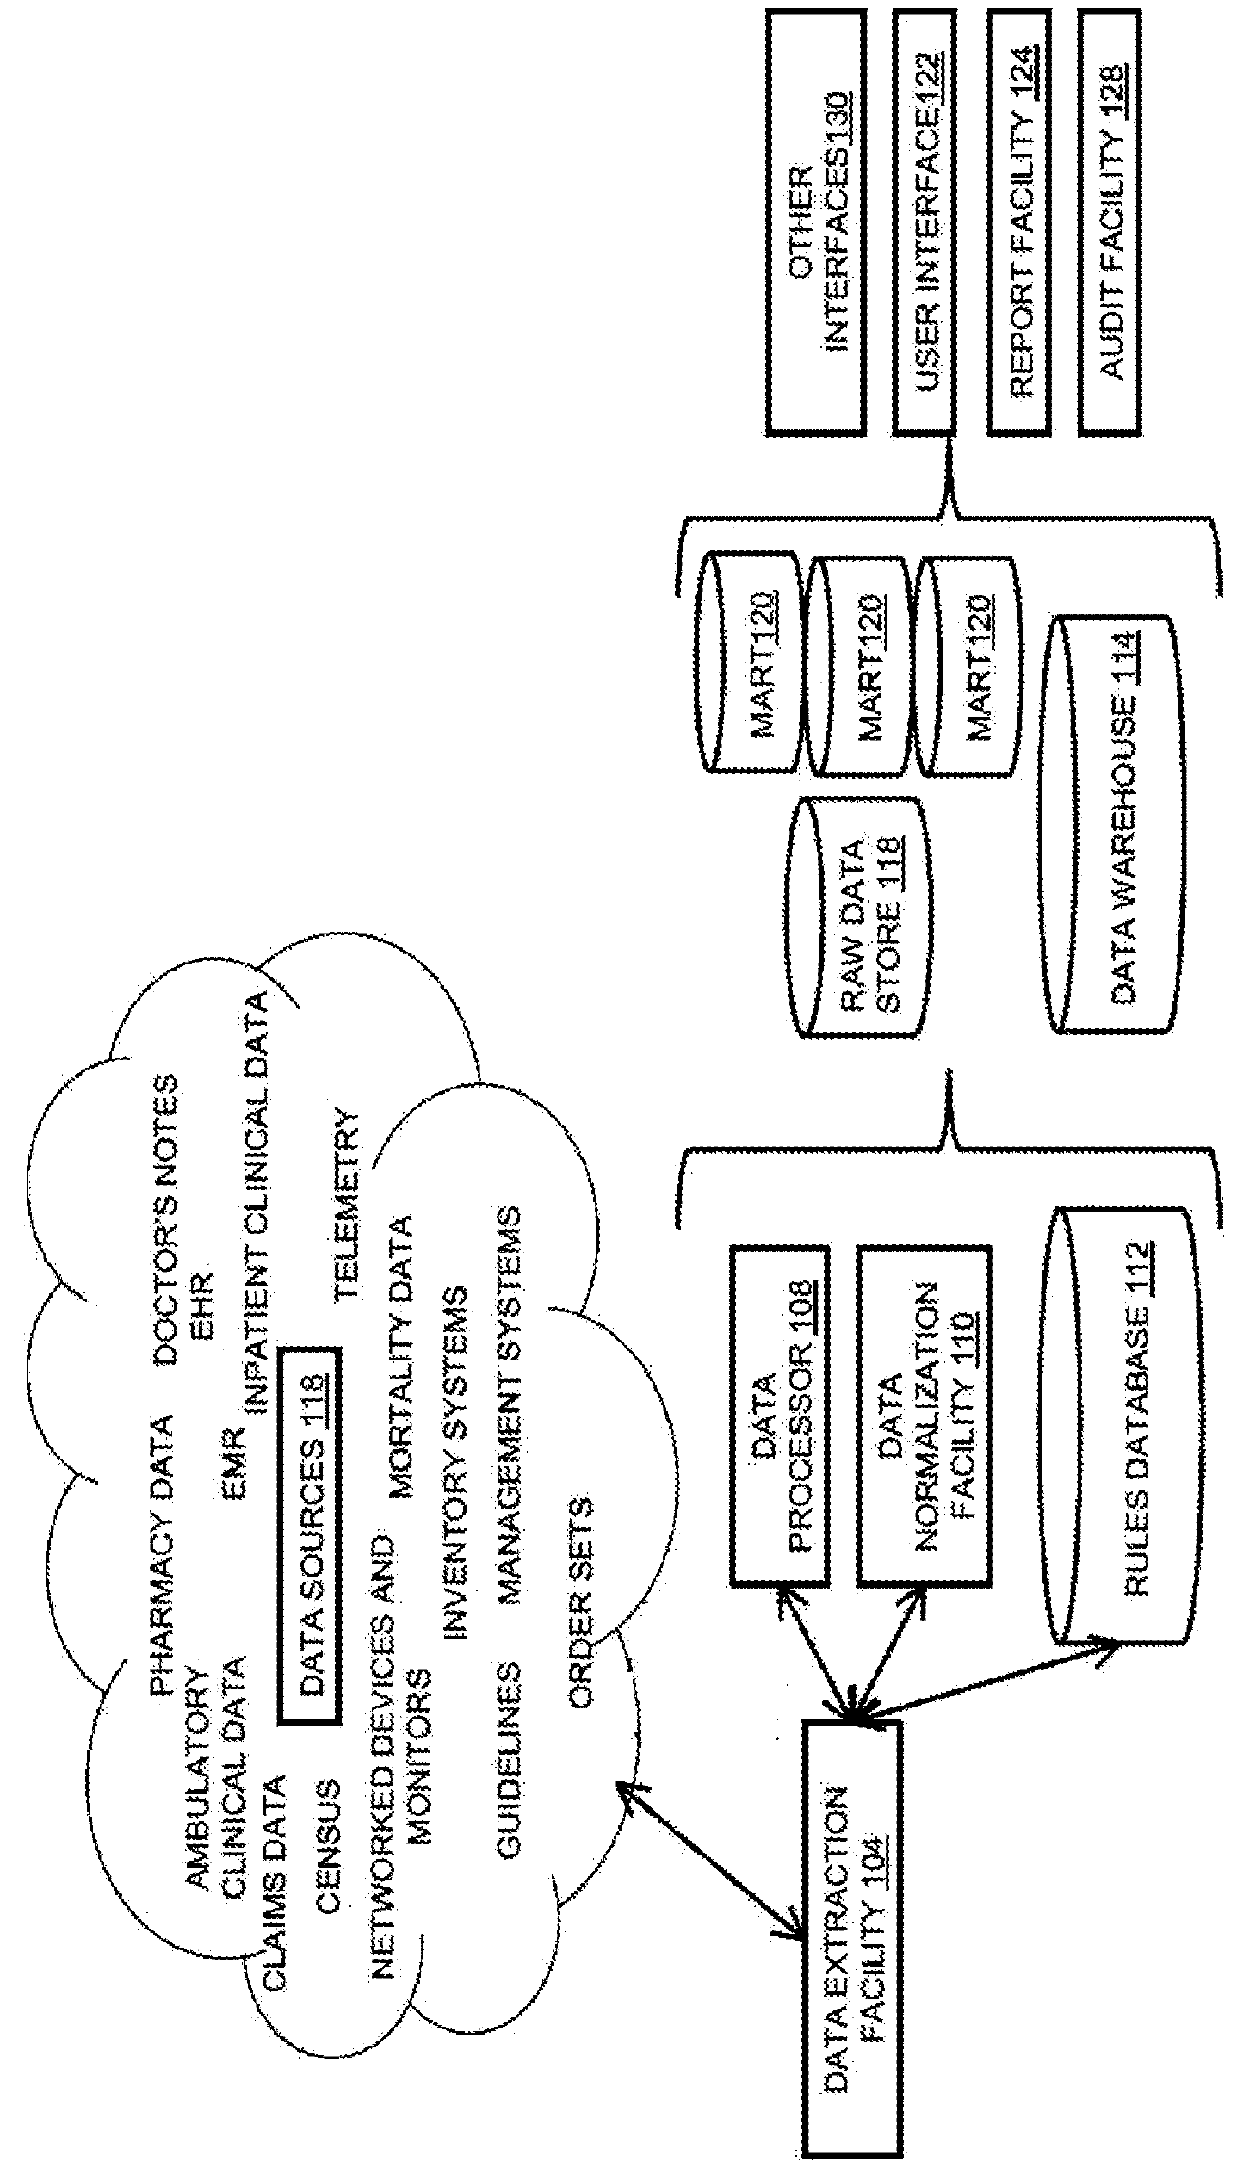 Data processing systems and methods implementing improved analytics platform and networked information systems